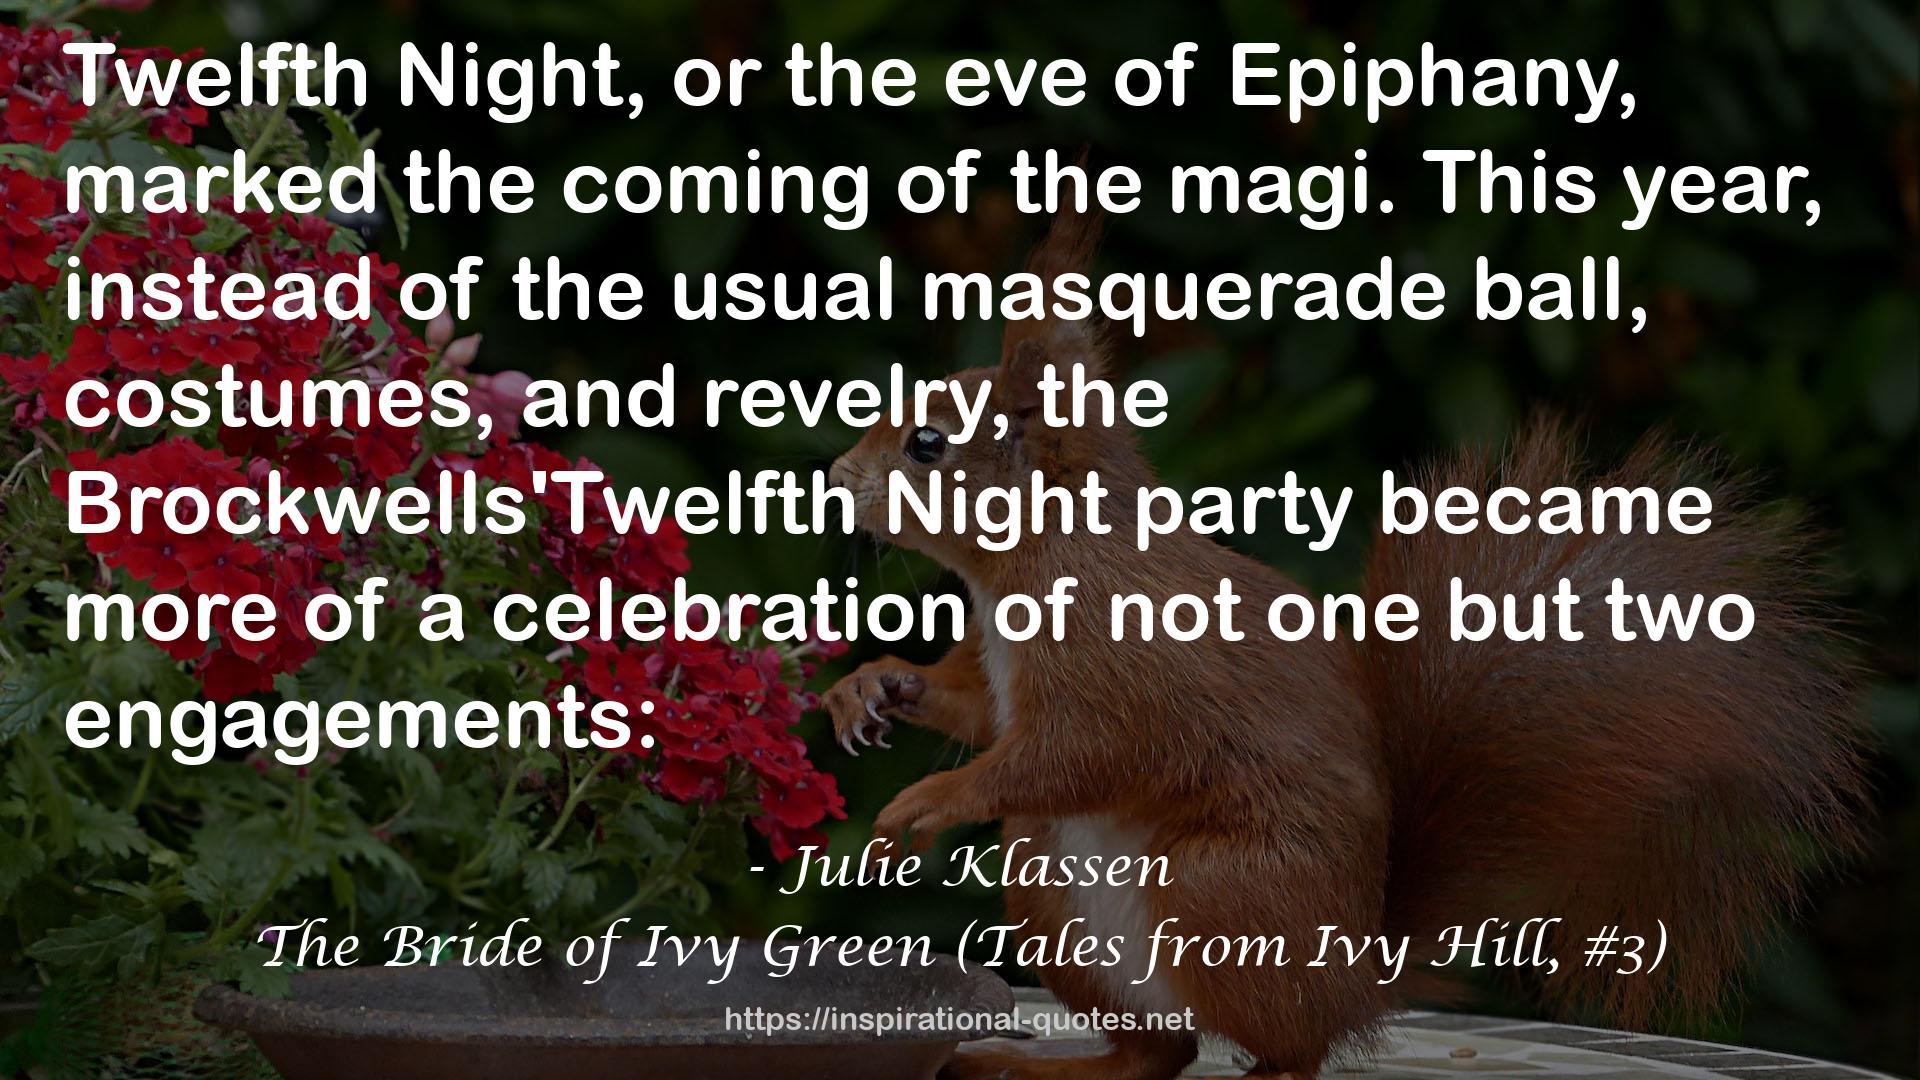 The Bride of Ivy Green (Tales from Ivy Hill, #3) QUOTES